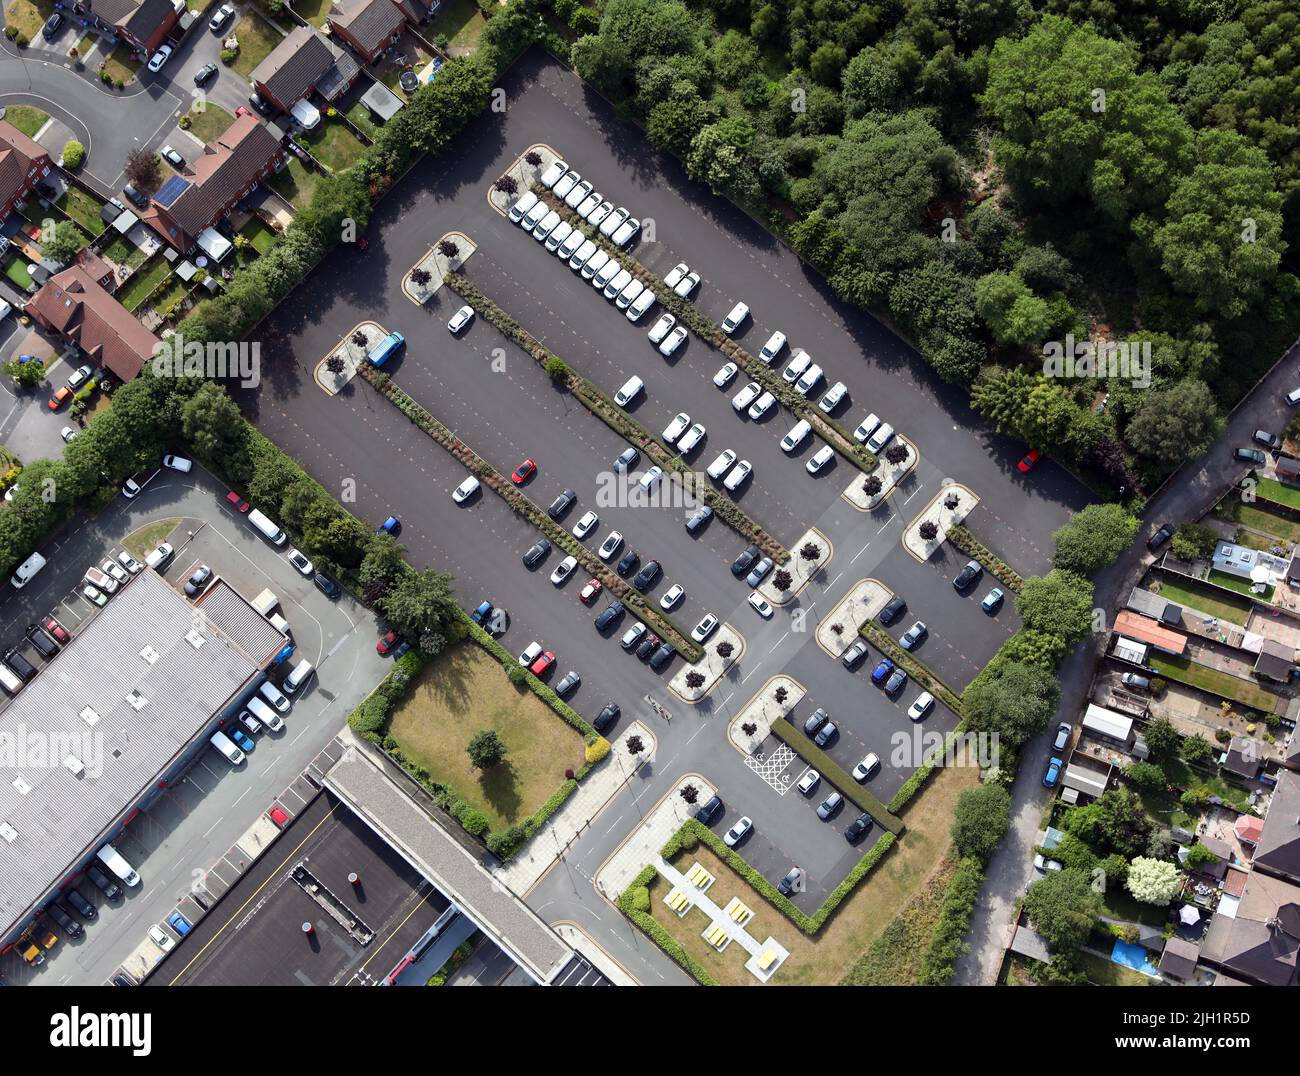 aerial view, almost plumb down vertical, of a car park or parking lot (this one being in Grston, Liverpool, UK) Stock Photo